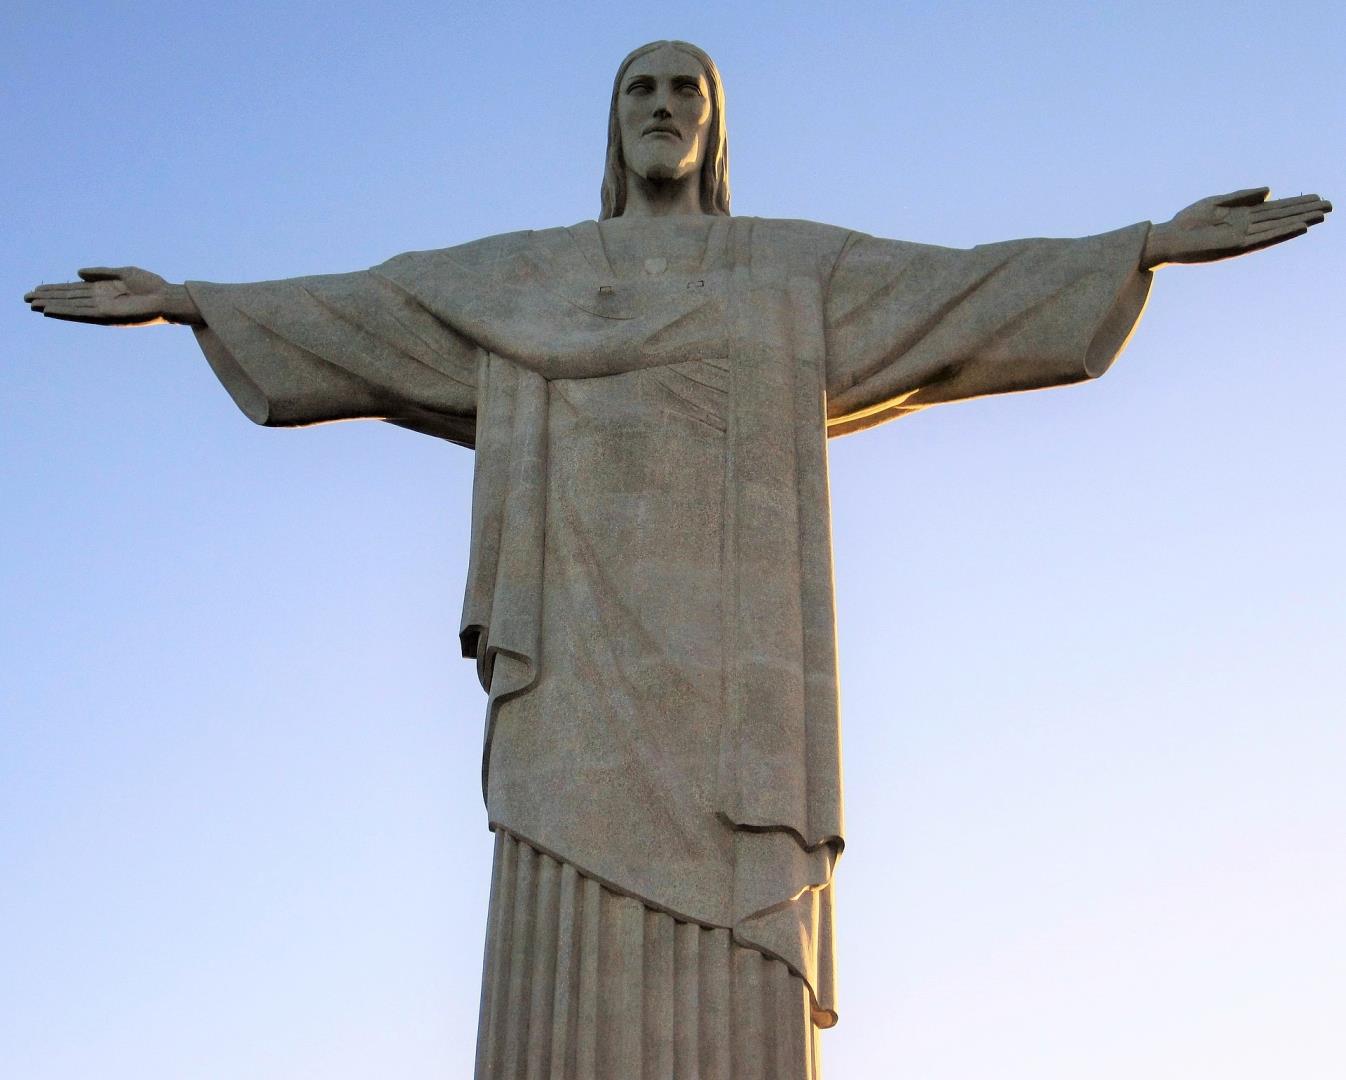 Close-up view of Christ the Redeemer Statue - Photo Credit: Assy via Pixabay